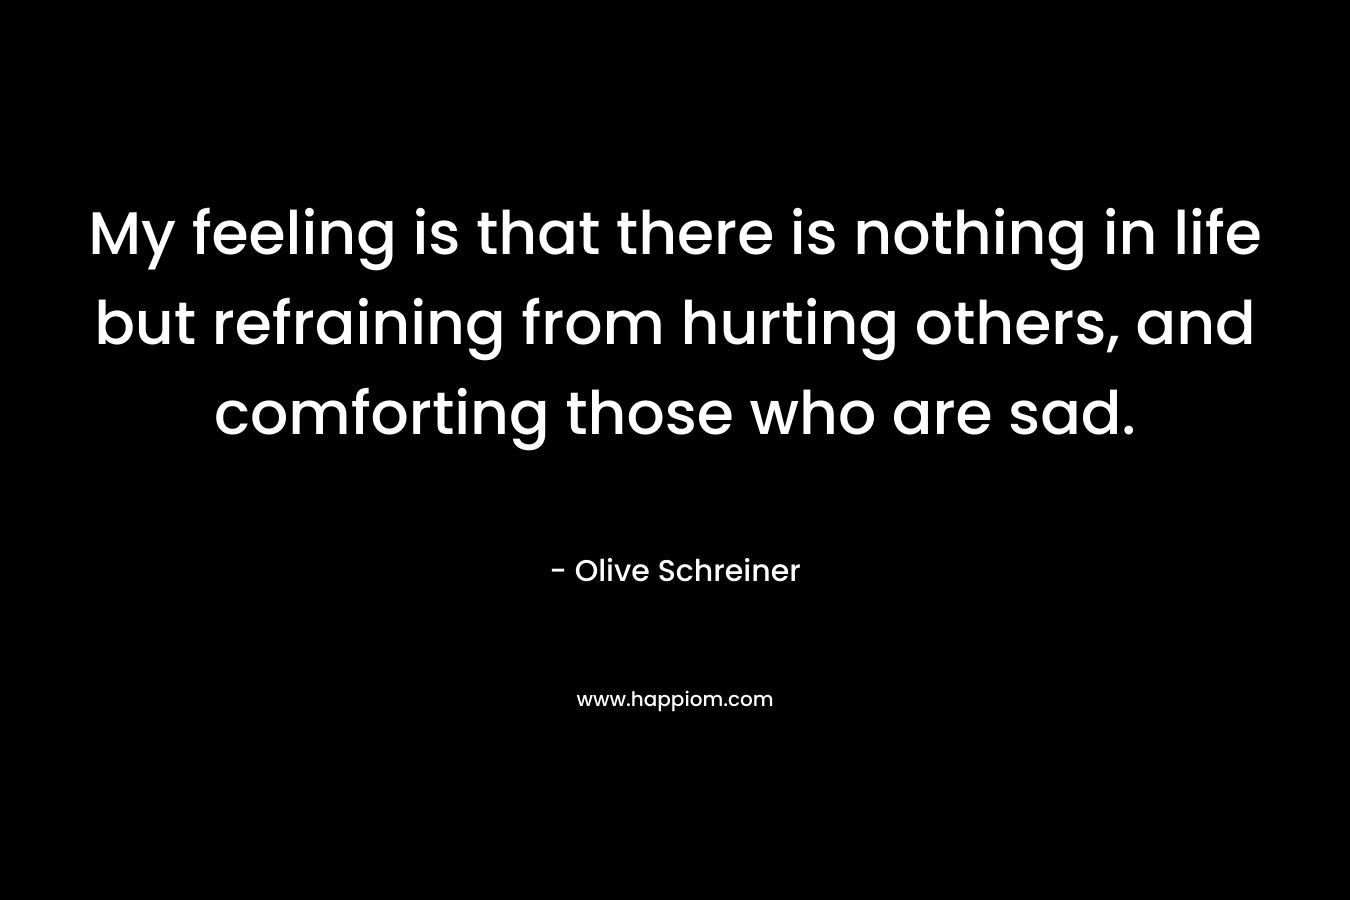 My feeling is that there is nothing in life but refraining from hurting others, and comforting those who are sad.